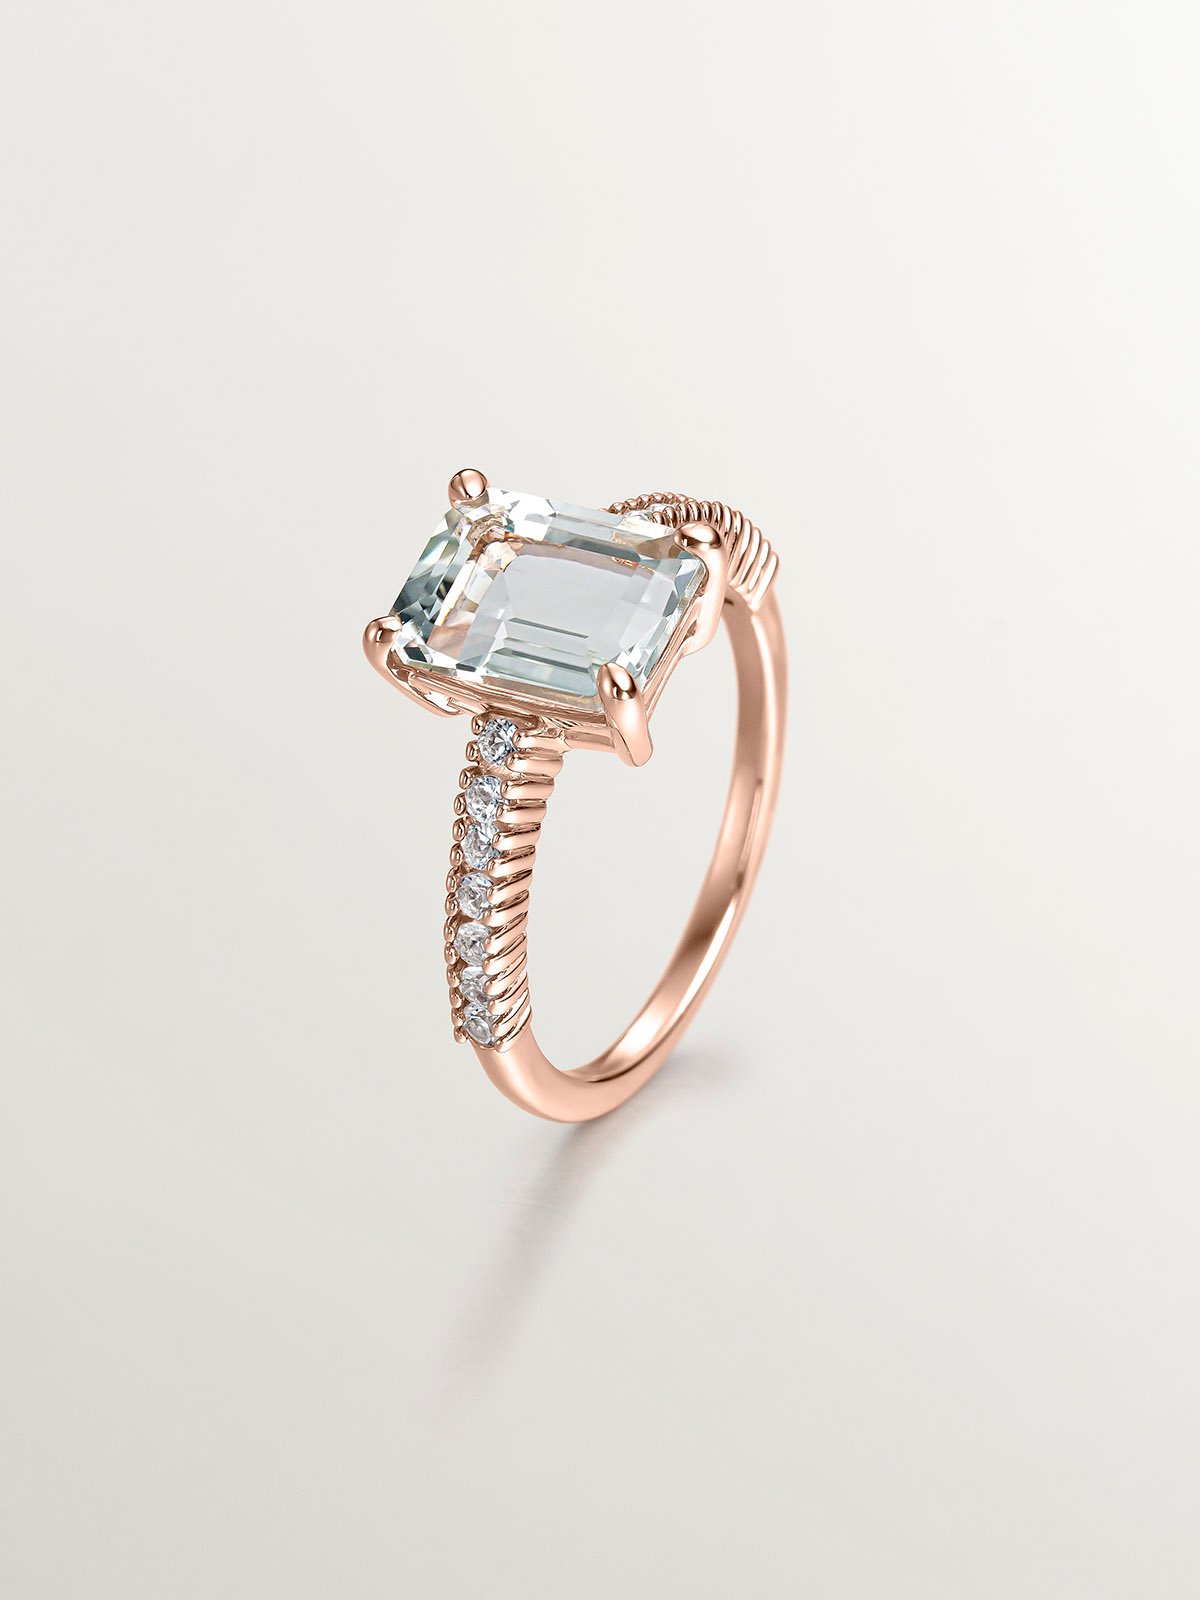 925 Silver ring bathed in 18K rose gold with green quartz and white topaz.